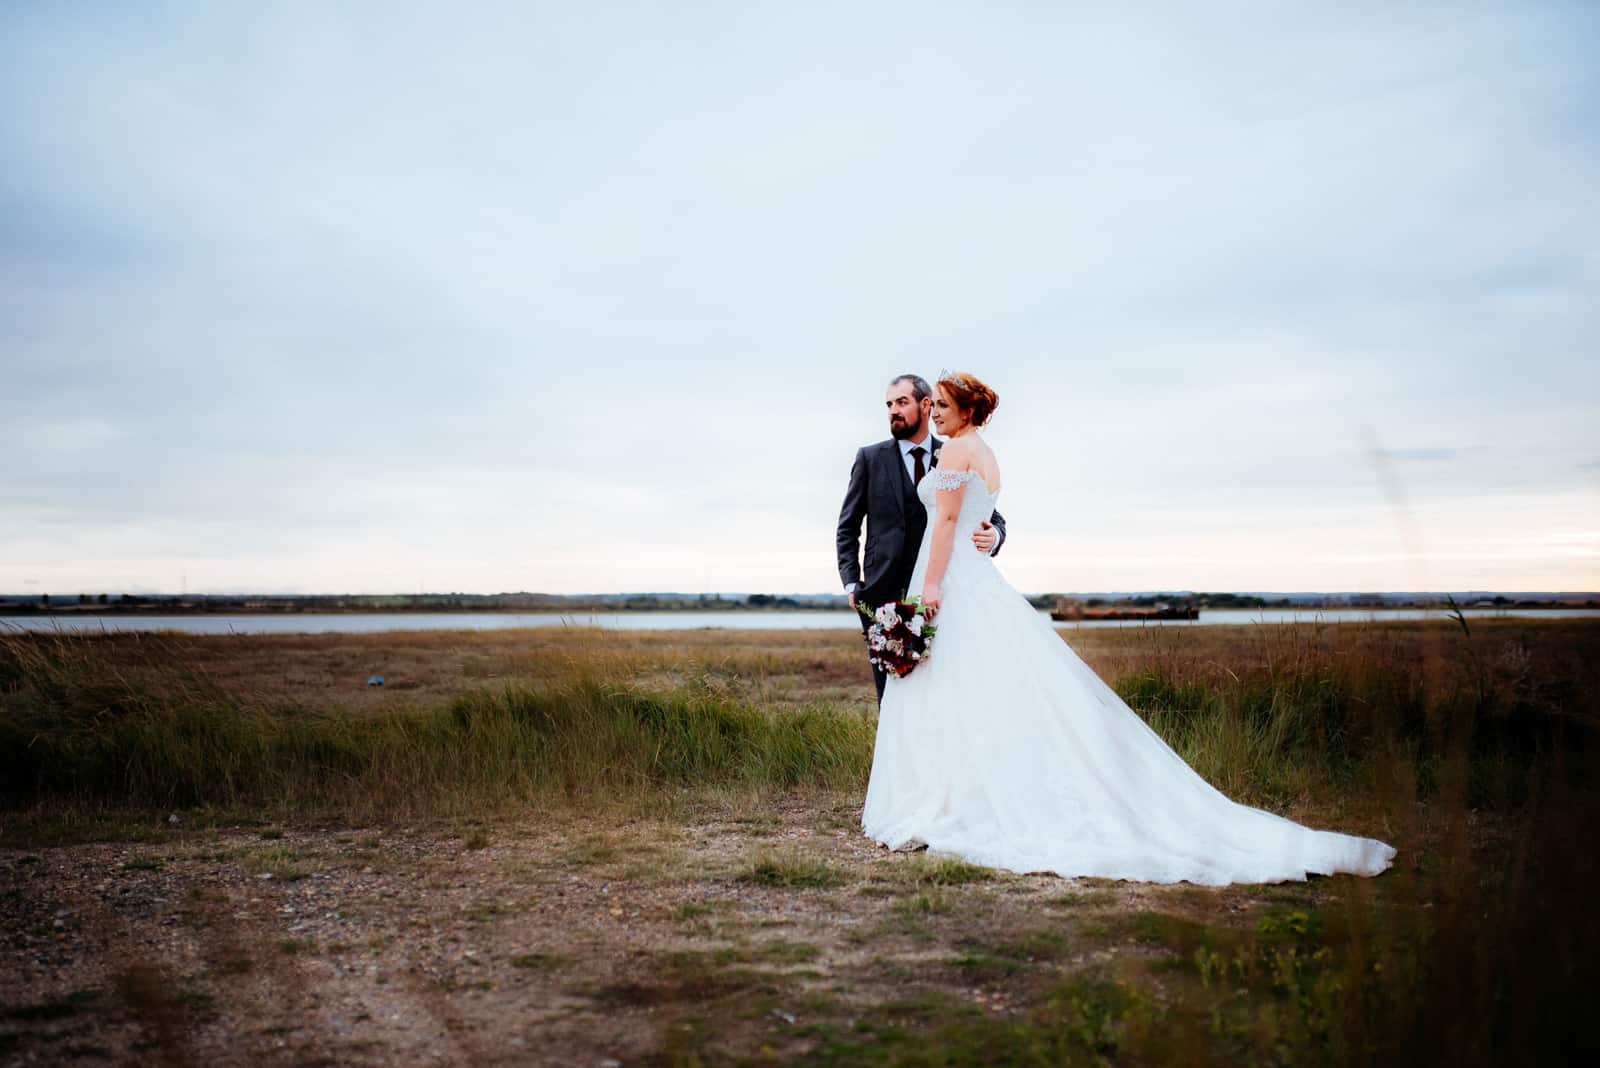 A bride and groom are photographed on a beach